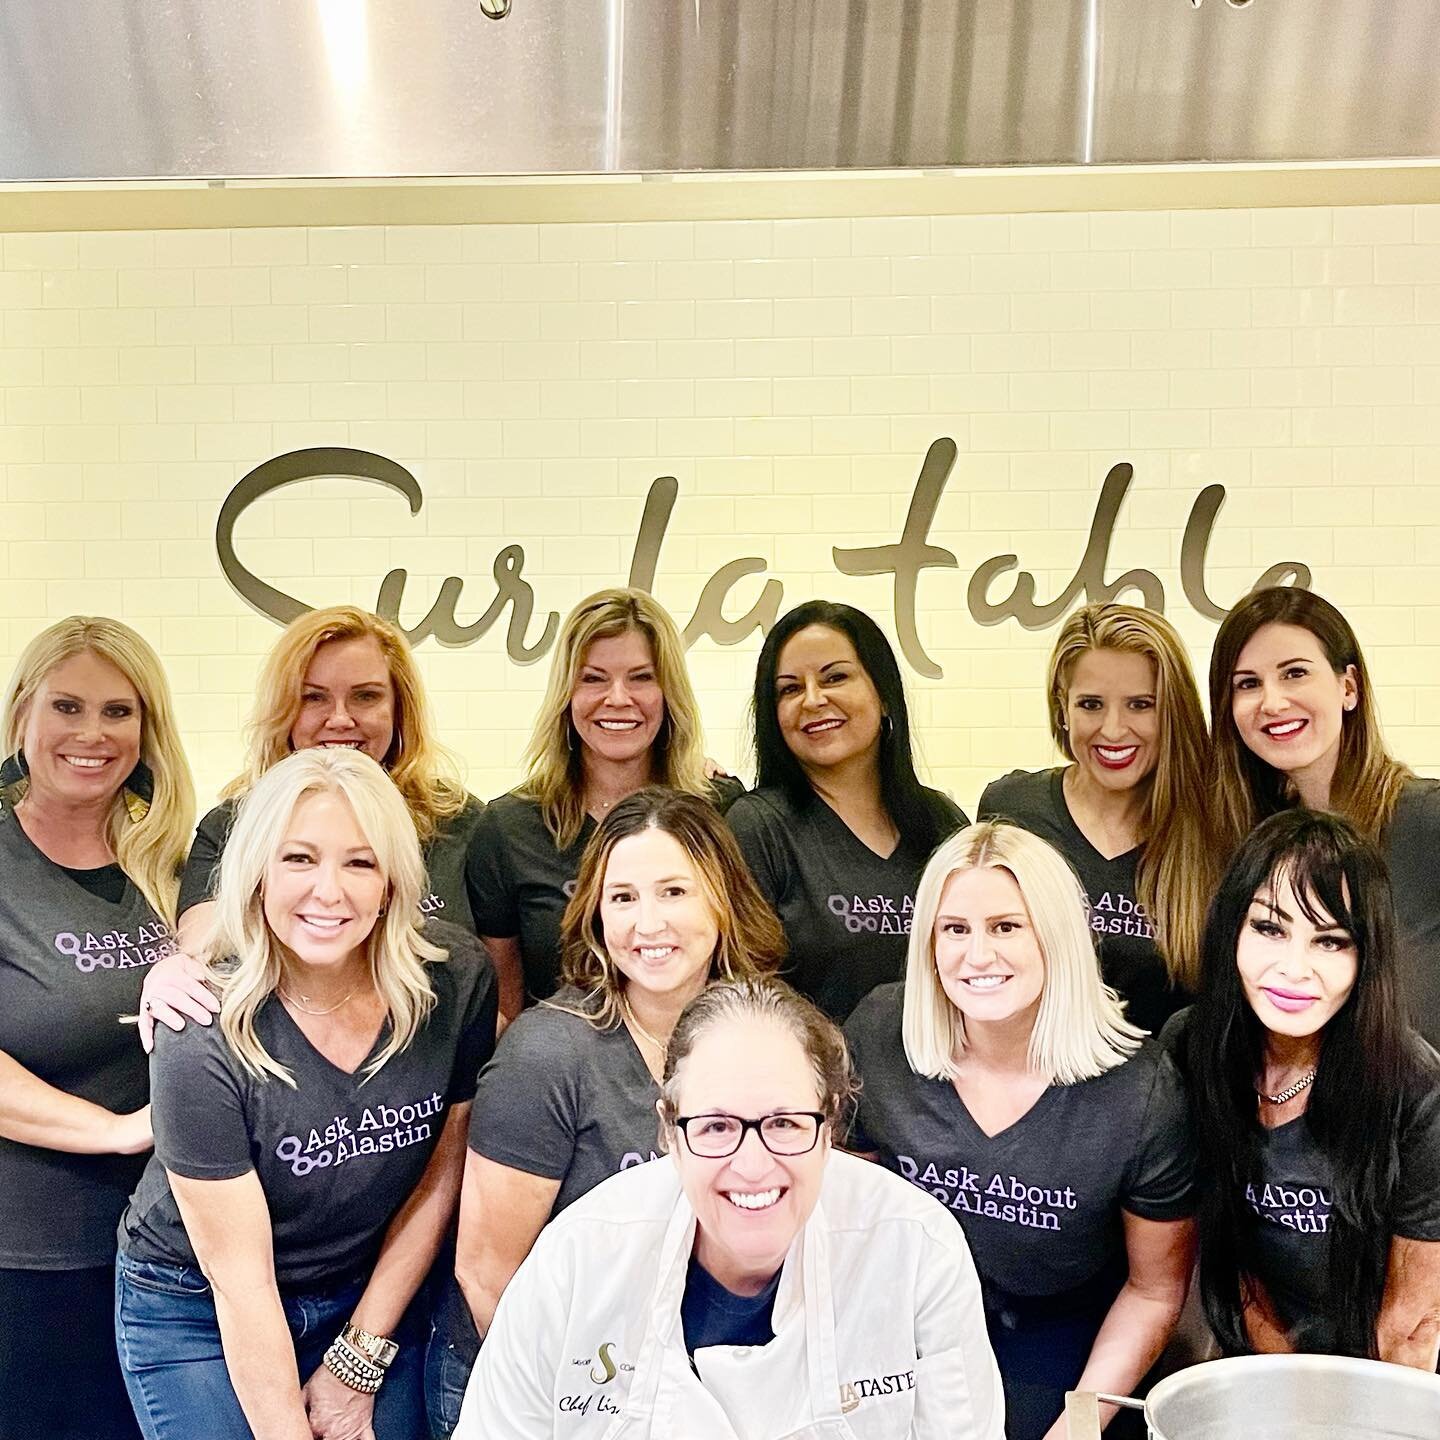 An amazing week of education with the BEST team! 💜 #education #alastinskincare #educator #skincare #alastin #aesthetics #science #aesthetician #galderma #cookingforcollagen #teambuilding